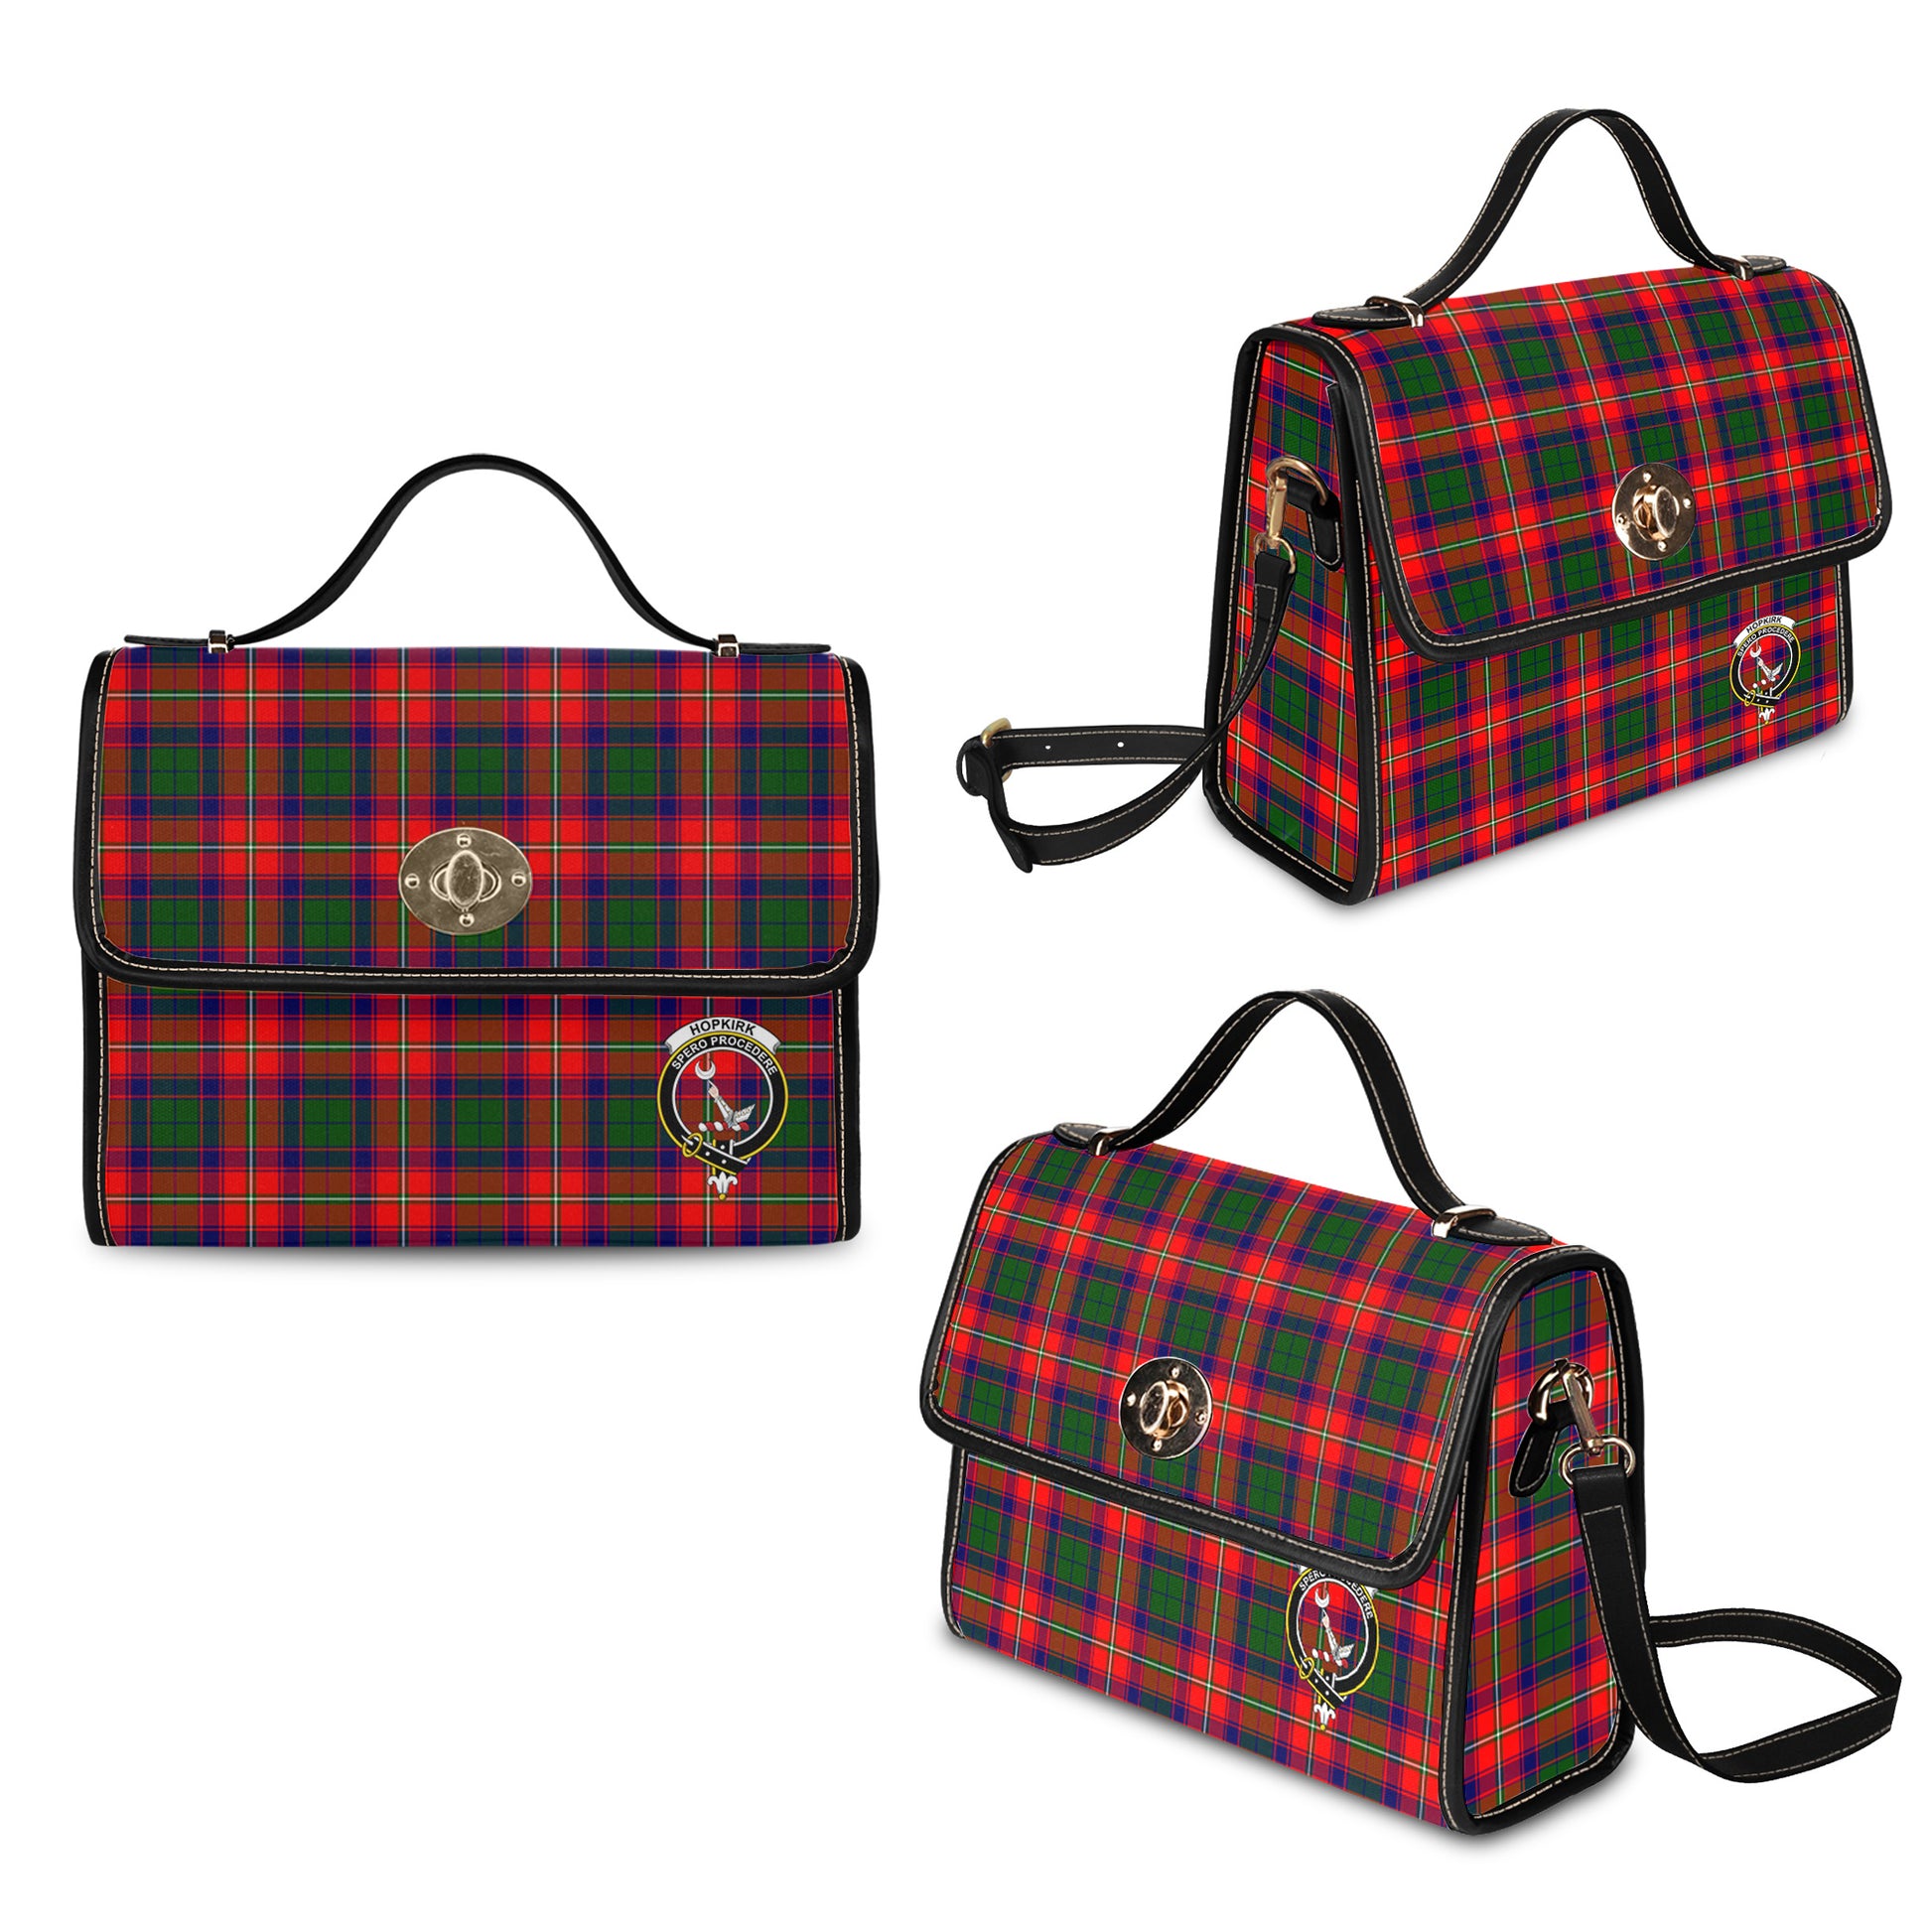 hopkirk-tartan-leather-strap-waterproof-canvas-bag-with-family-crest